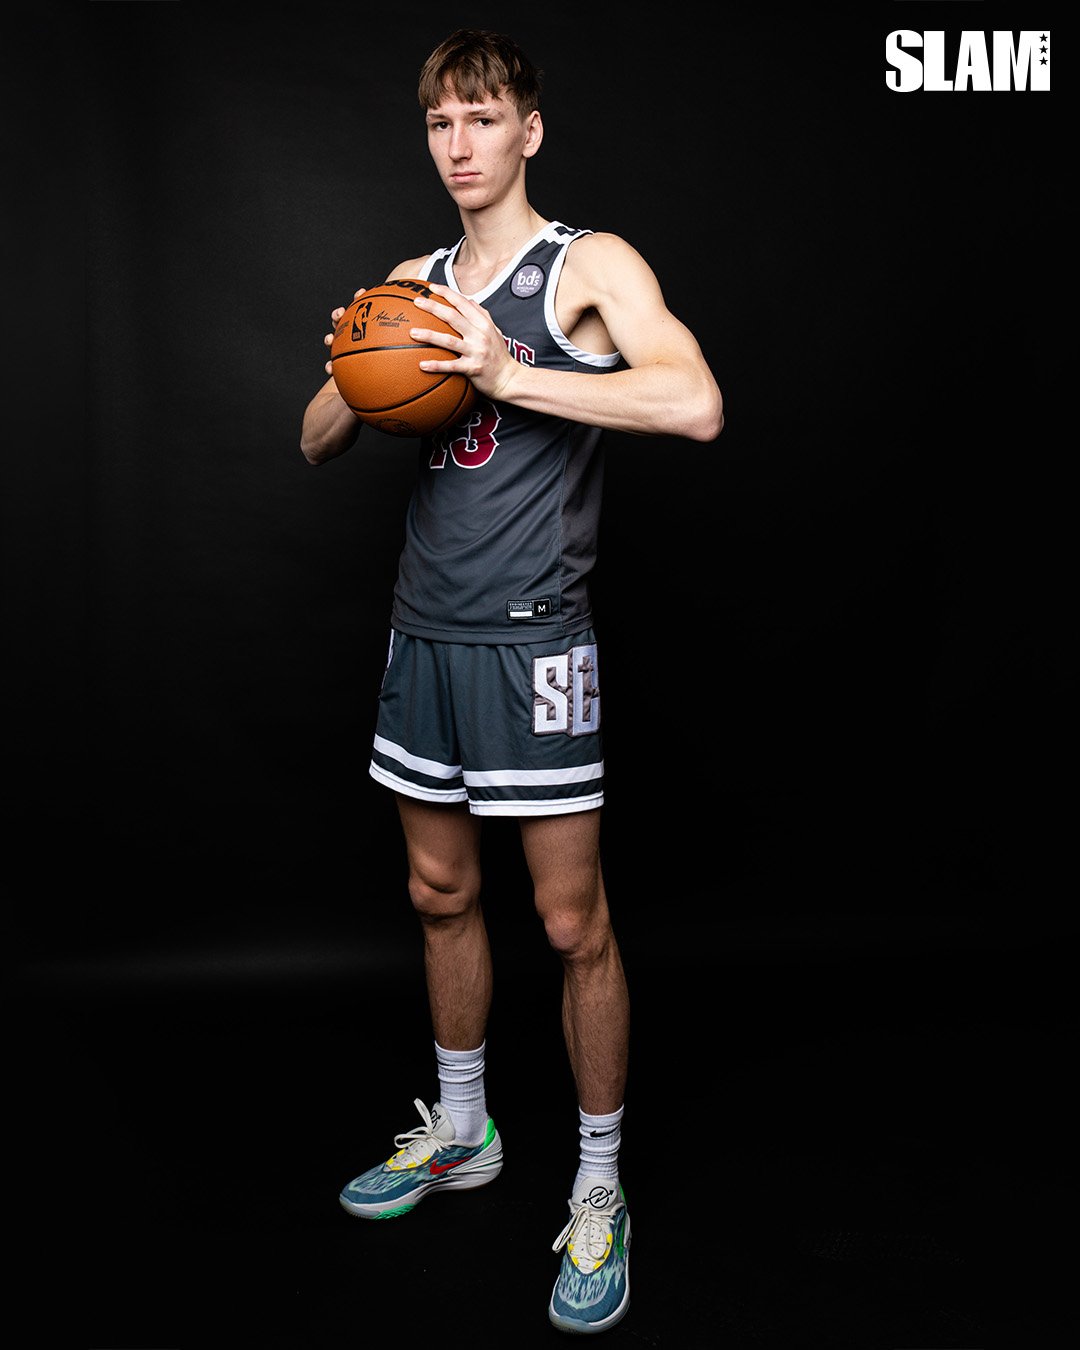 Meet Matas Buzelis: the Sunrise Christian Academy Senior With an All-Around Game Headed to the G League Ignite